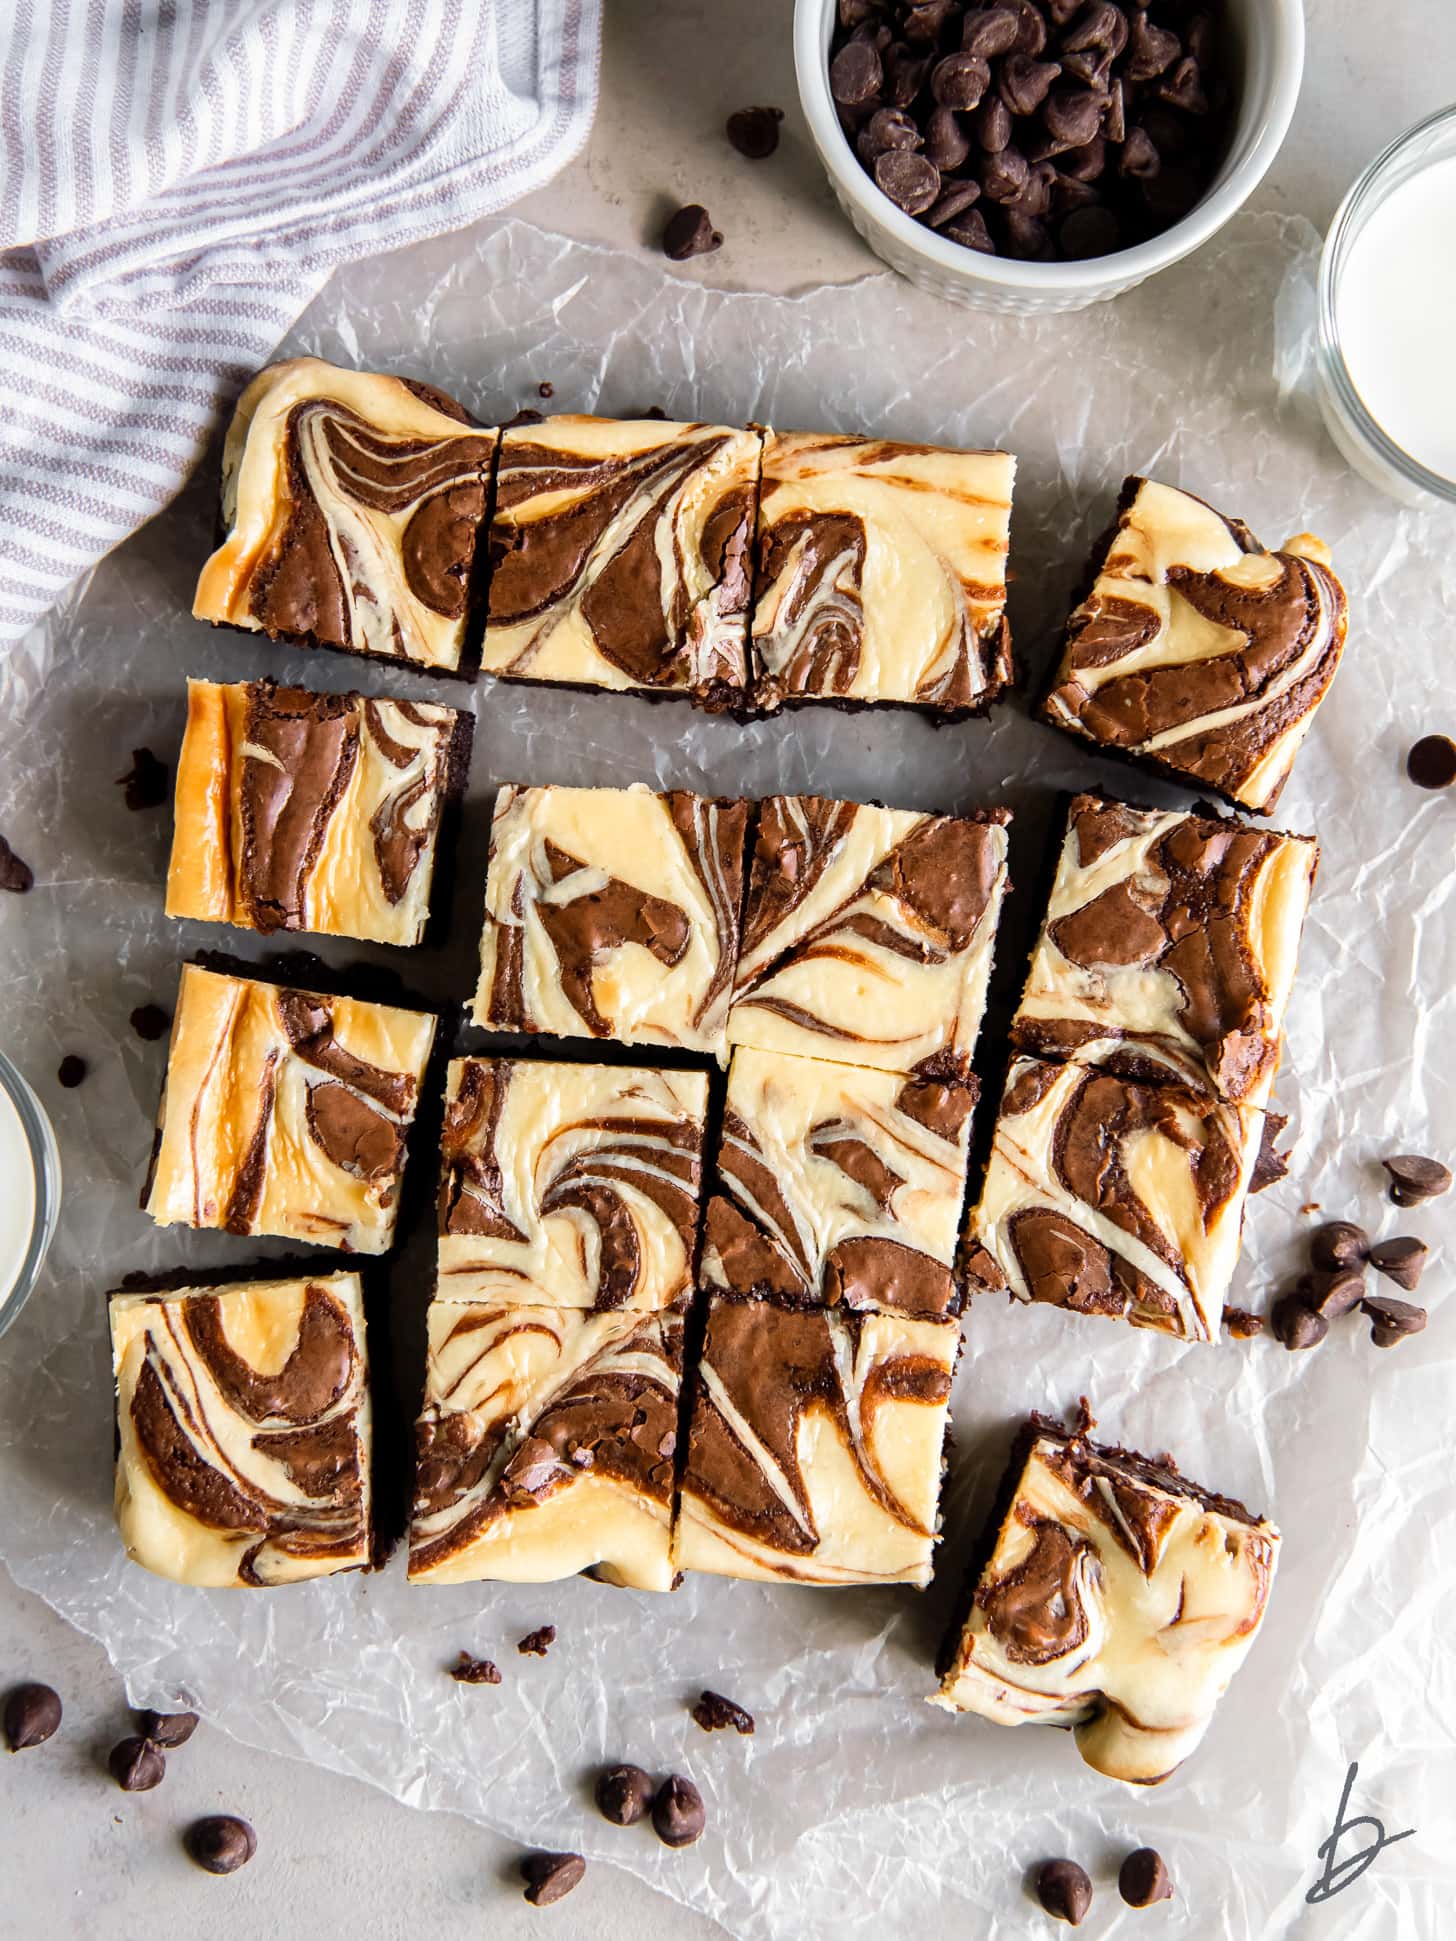 cream cheese swirl brownies cut into squares on parchment paper.